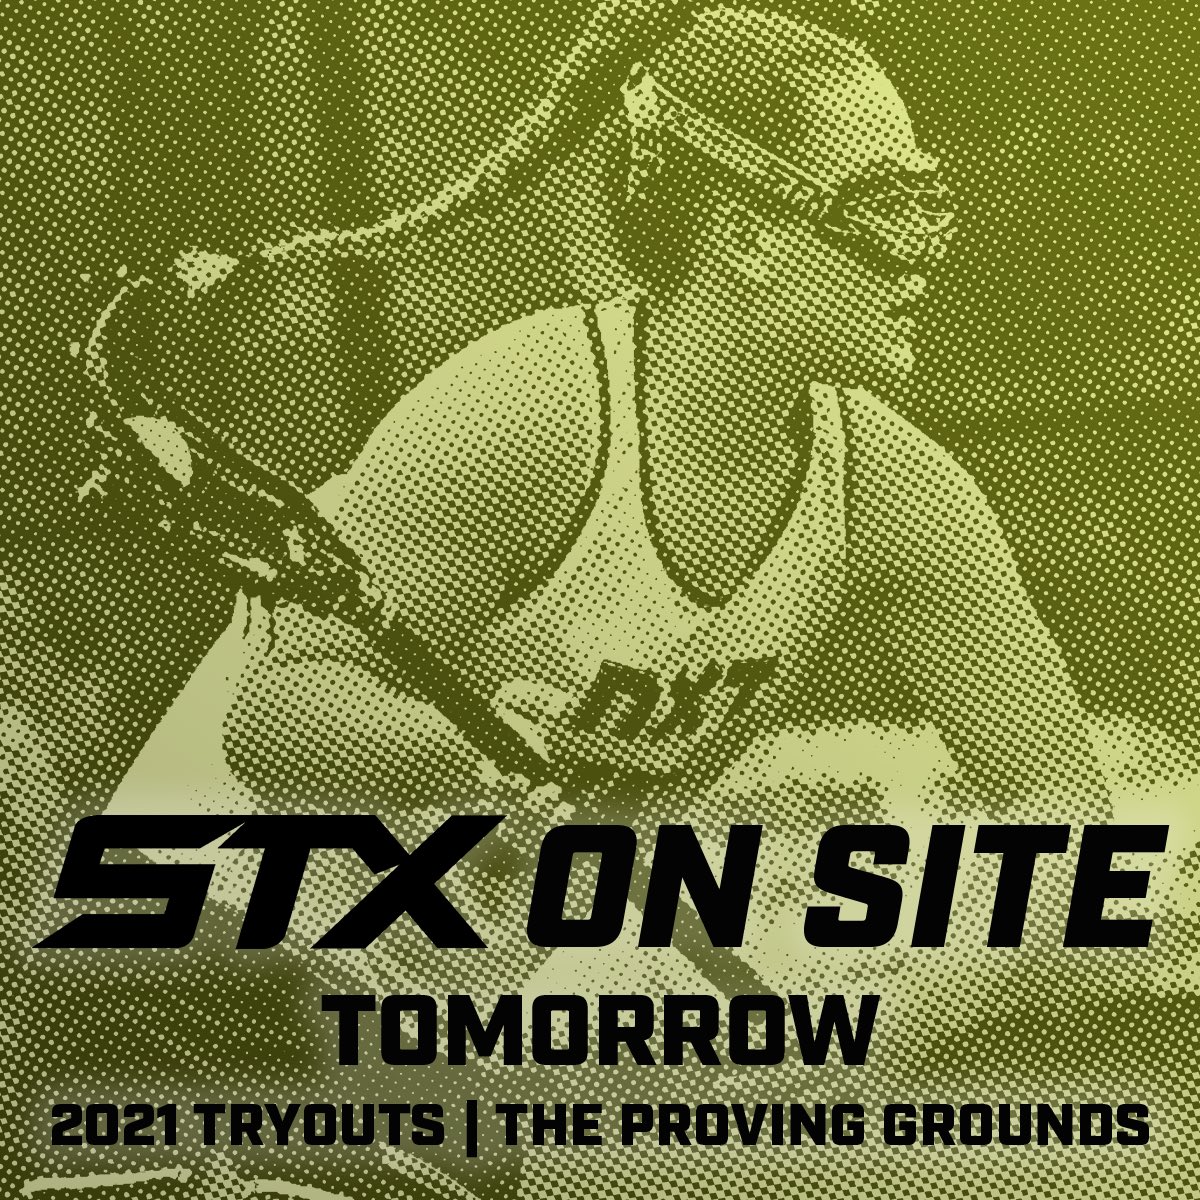 Tryouts and trying it out. STX will be on site tomorrow at tryouts and they’re bringing some sweet new prototype items for select players & grad years to test before they even go into production! 😮🤯 🤗 We can’t wait! 

#NXTTryouts #ThatVoltLife #NXT2029 #NXT2024 #NXT2021